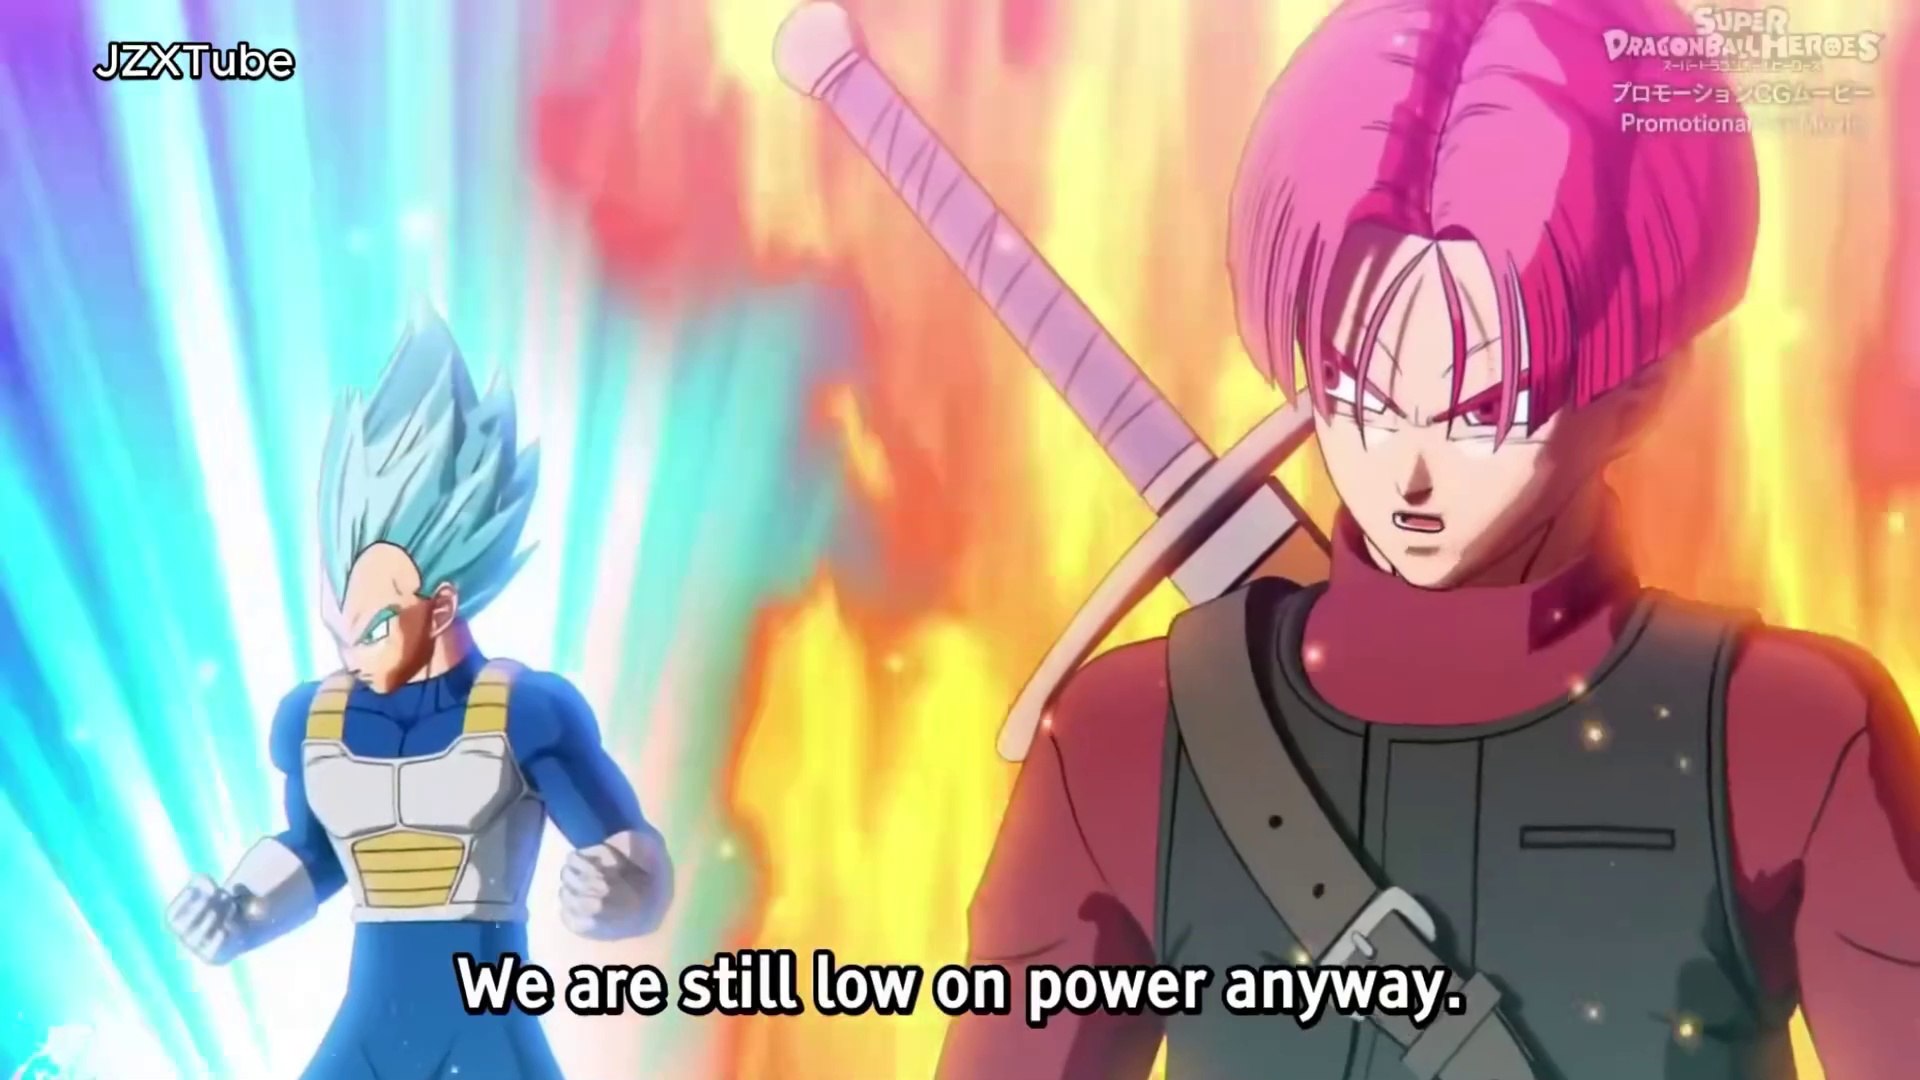 Super Dragon Ball Heroes Episode 51 English Subbed - video Dailymotion